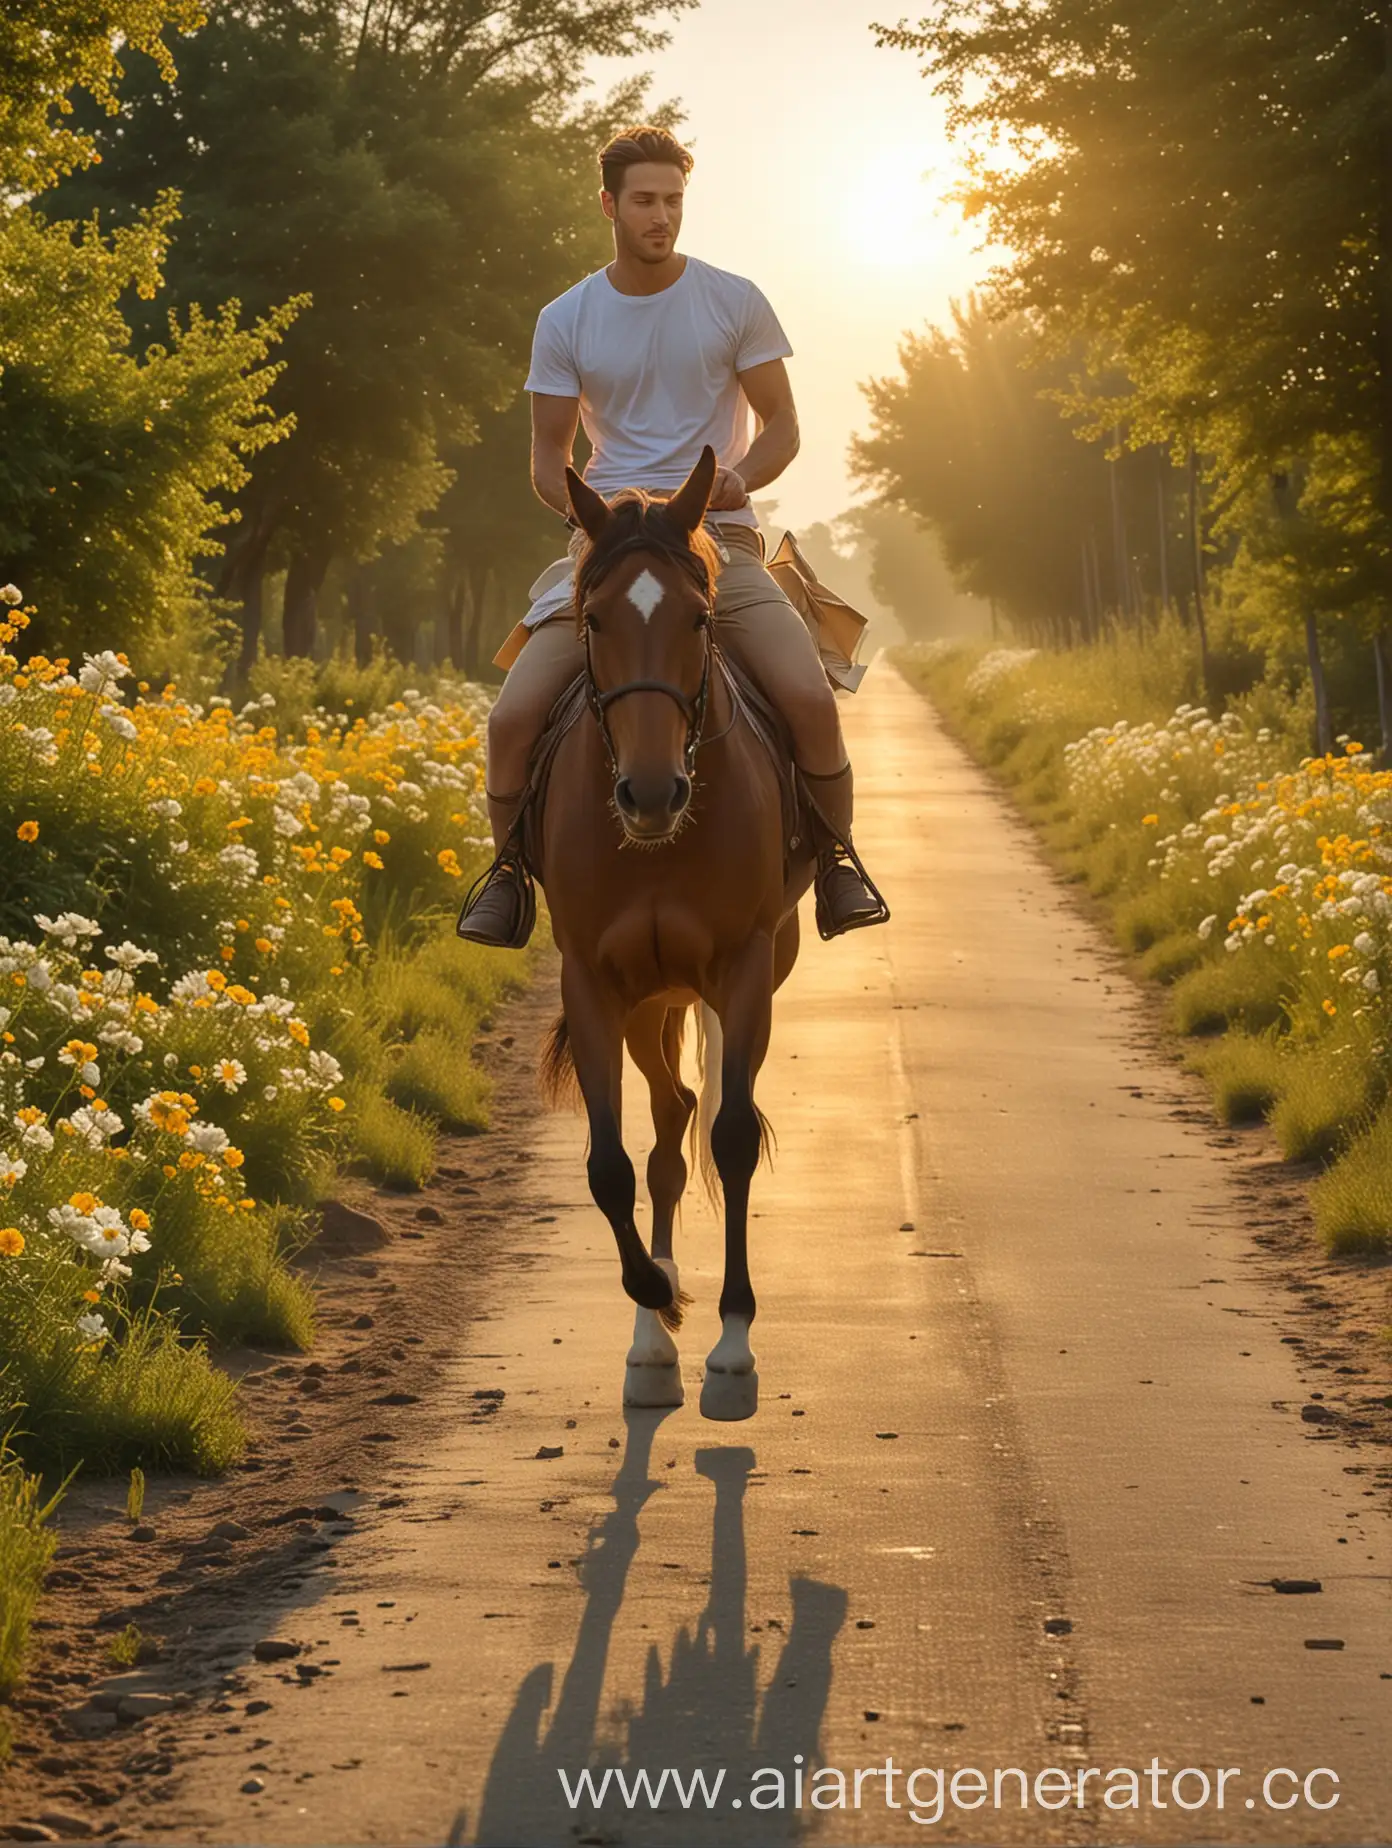 Man-Riding-Horse-at-Sunrise-with-Envelope-in-Hand